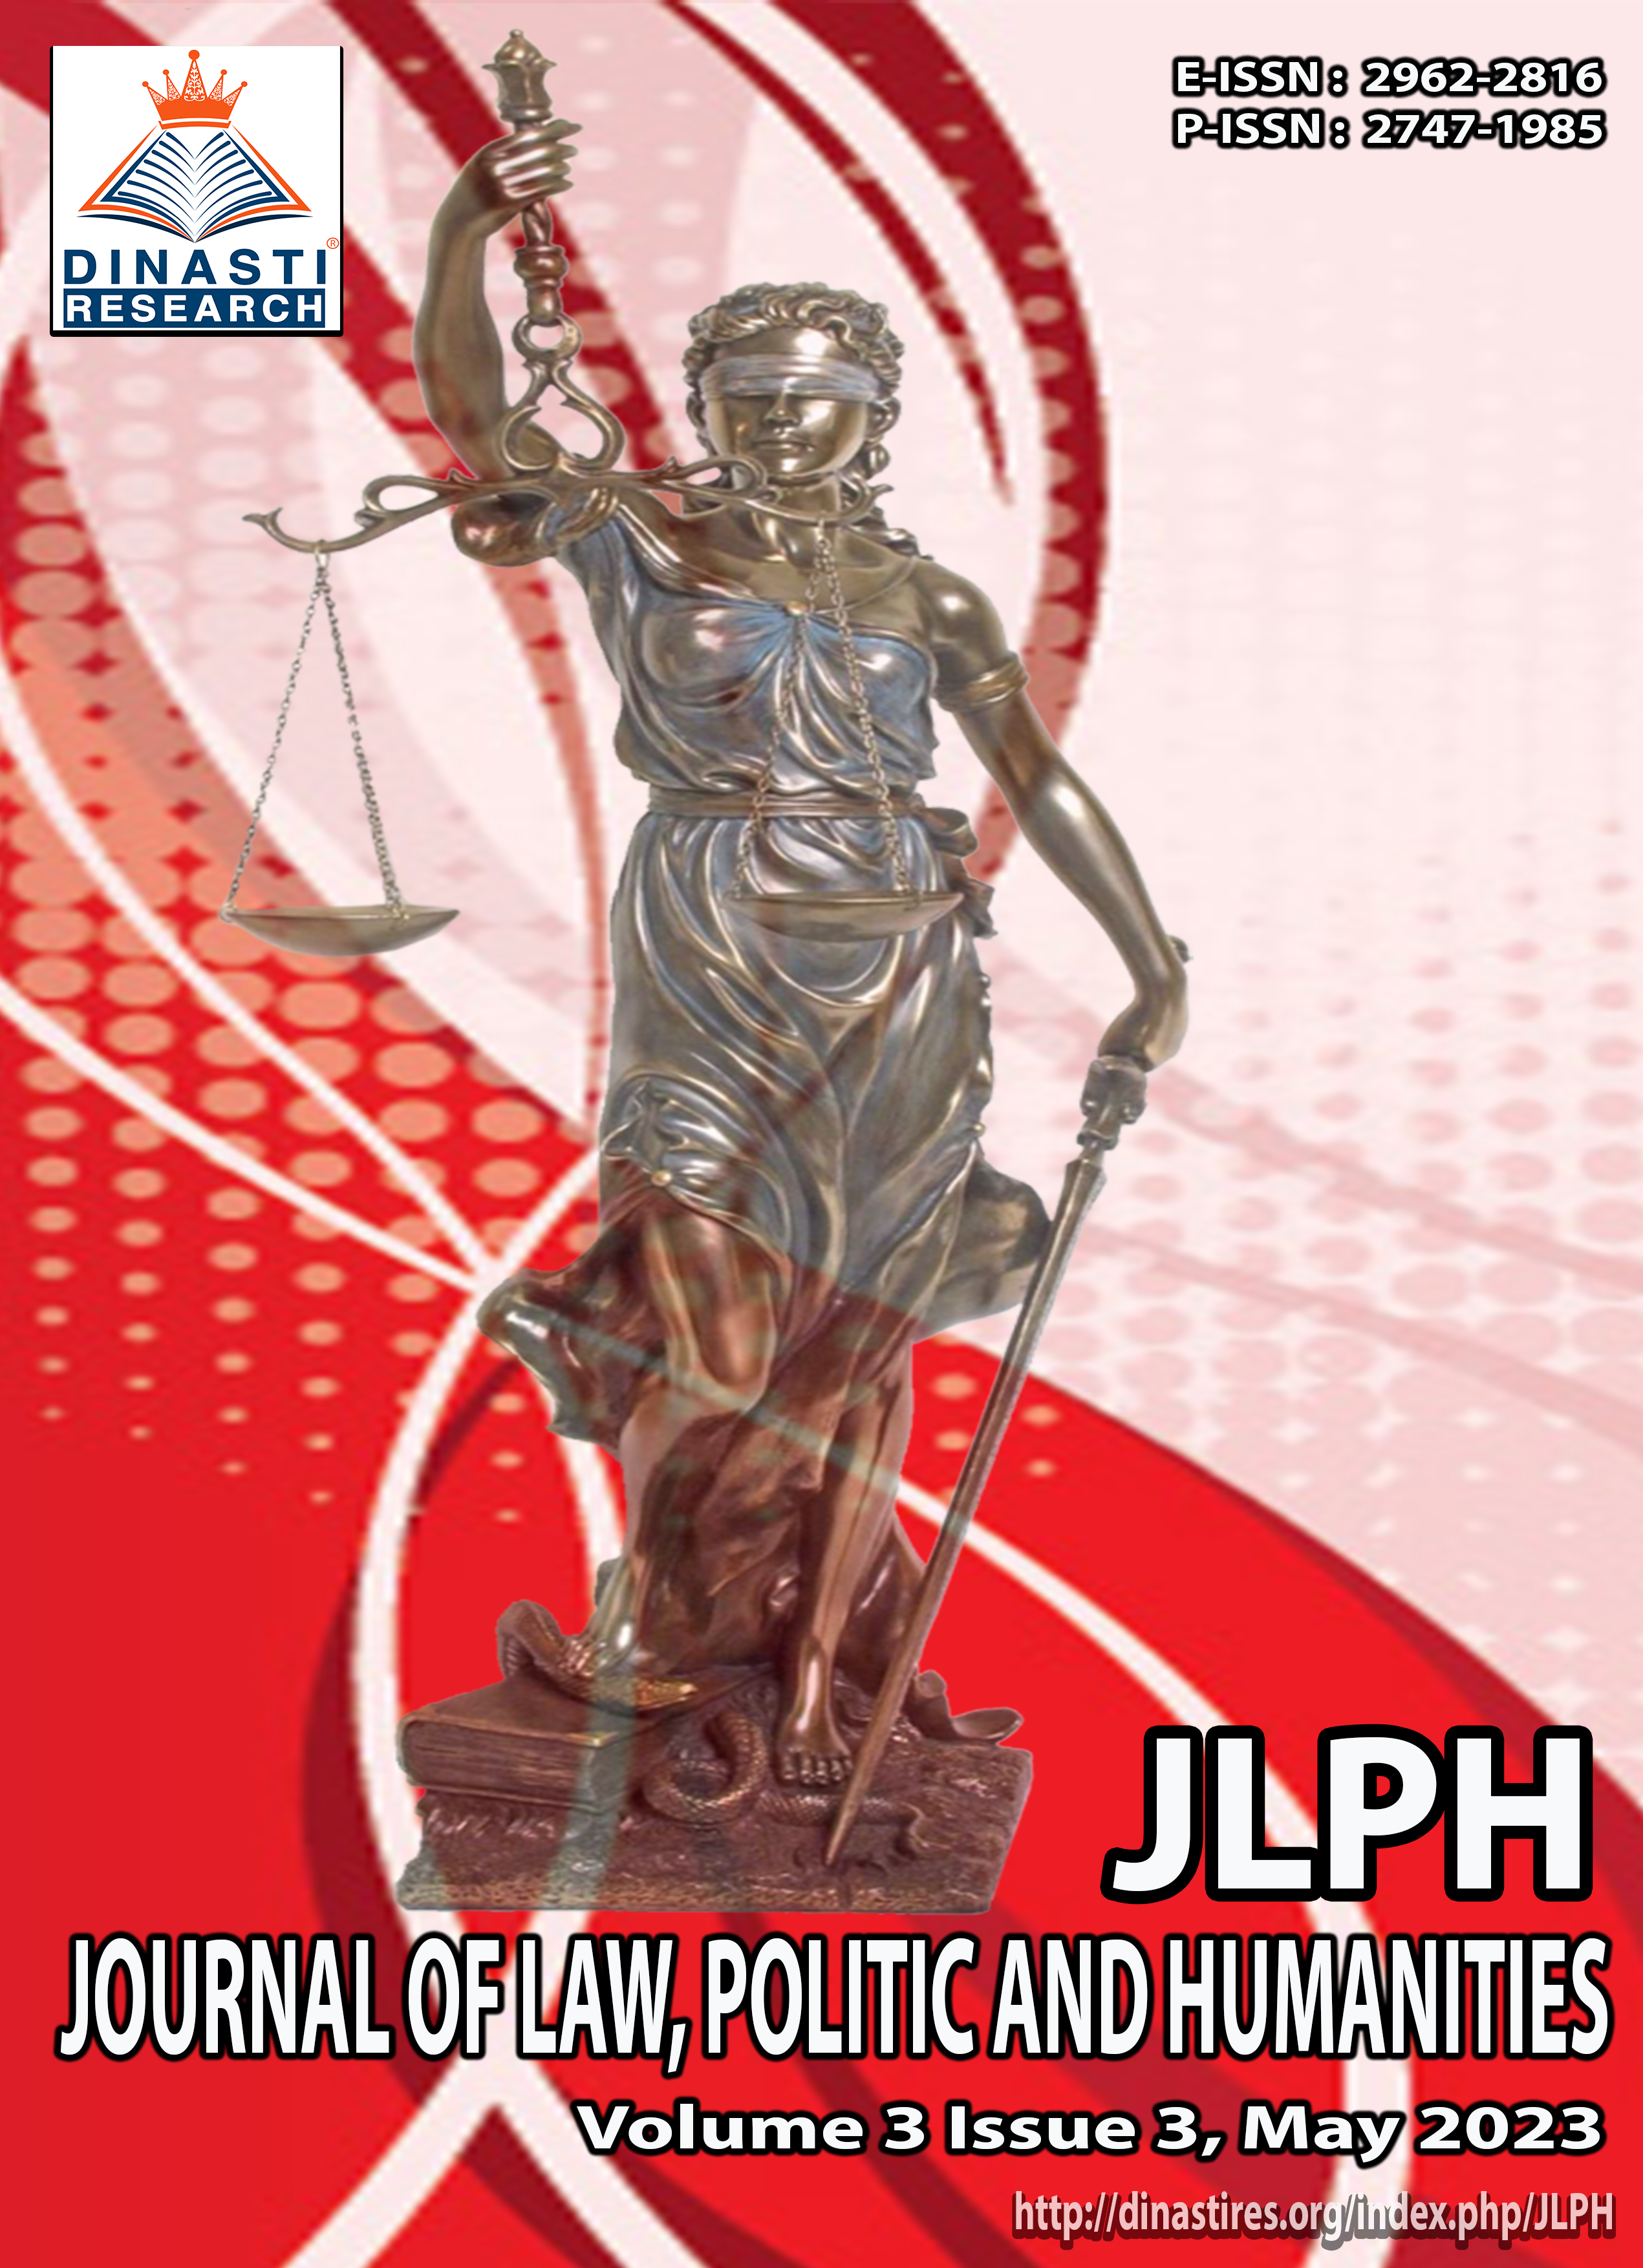 					View Vol. 3 No. 3 (2023): (JLPH) Journal of Law, Politic and Humanities (May 2023)
				